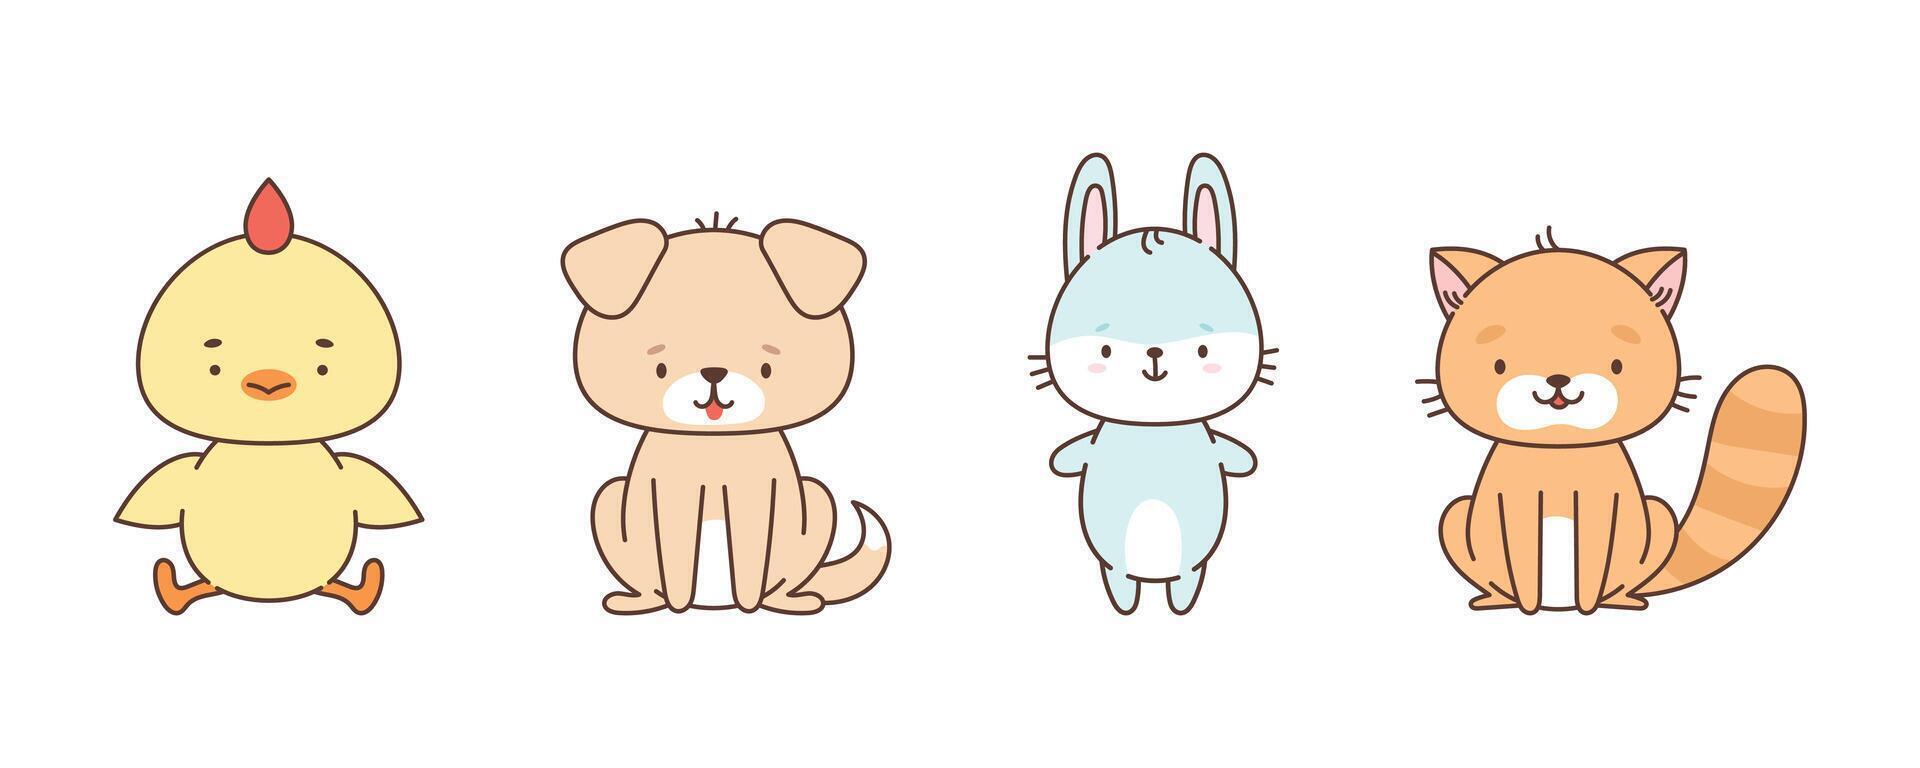 Set of cute farm animals chicken dog bunny cat. Cute animals in kawaii style. Drawings for children. vector illustration